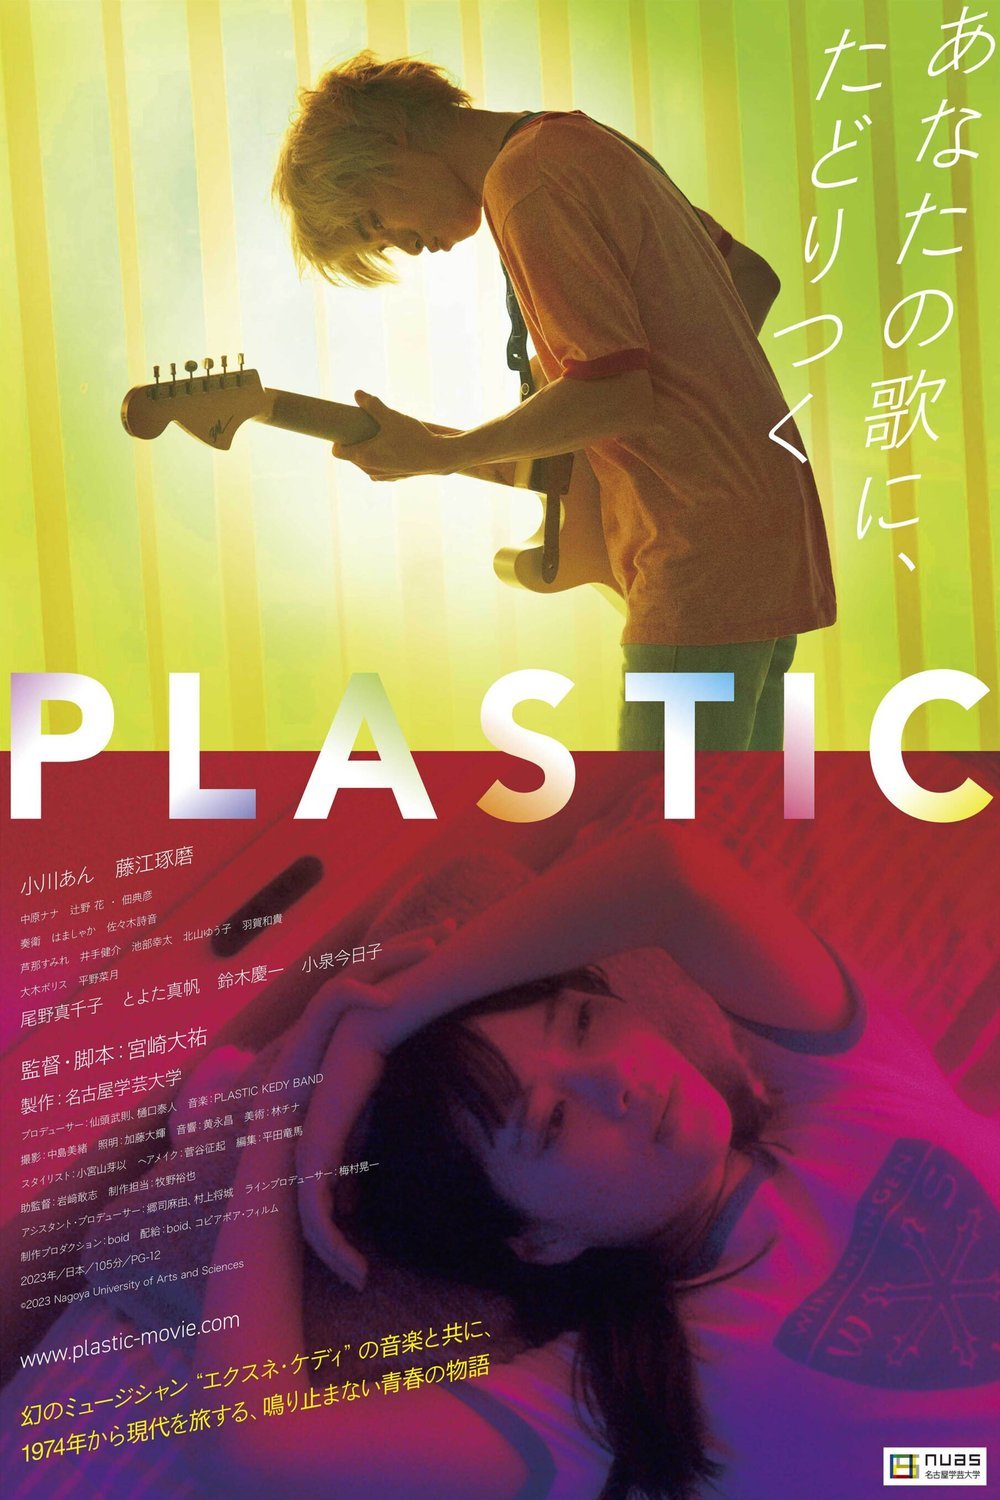 Japanese poster of the movie Plastic